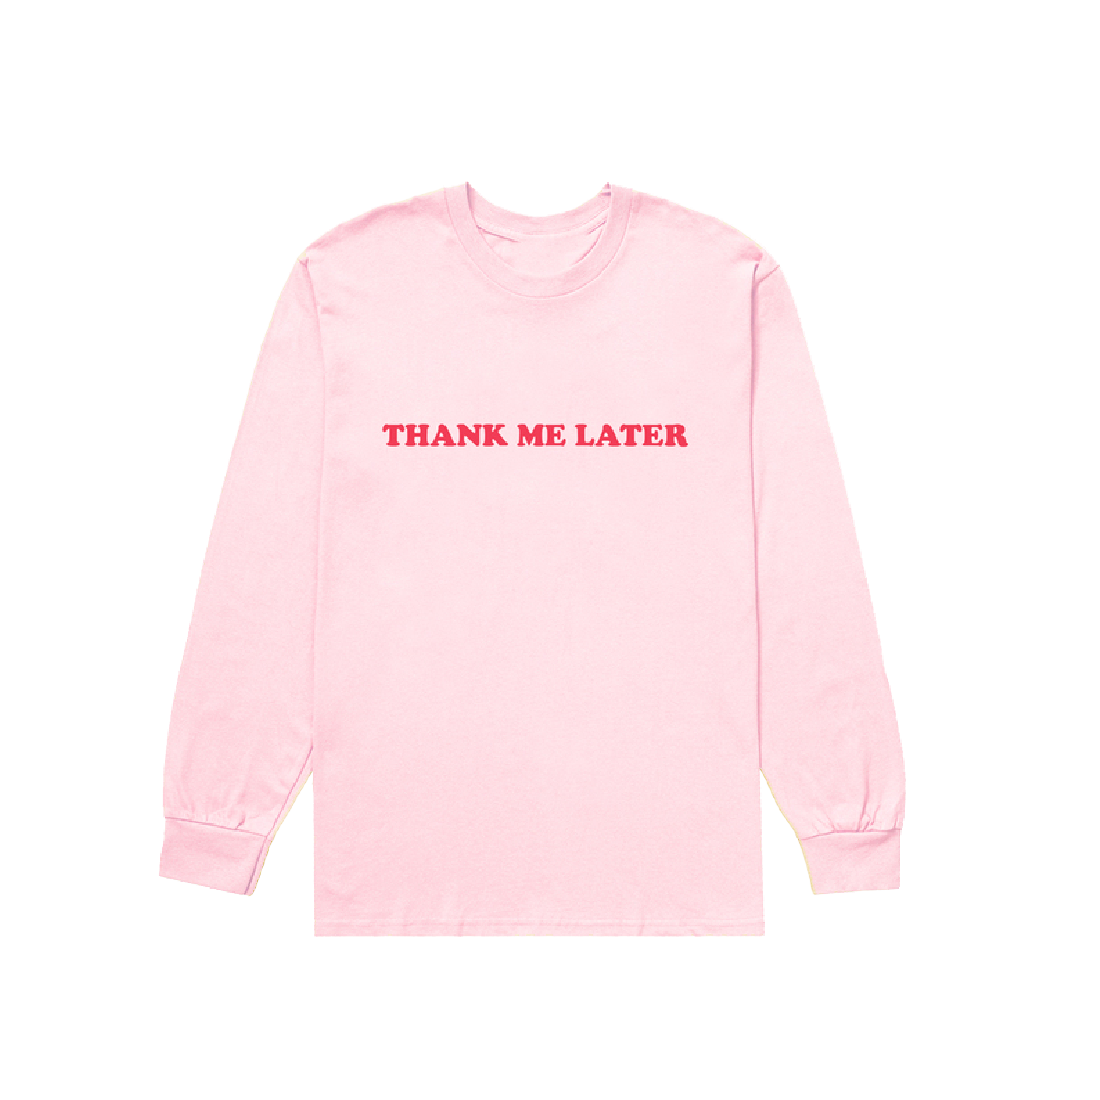 Sigrid - Thank Me Later Pink Longsleeve Tee